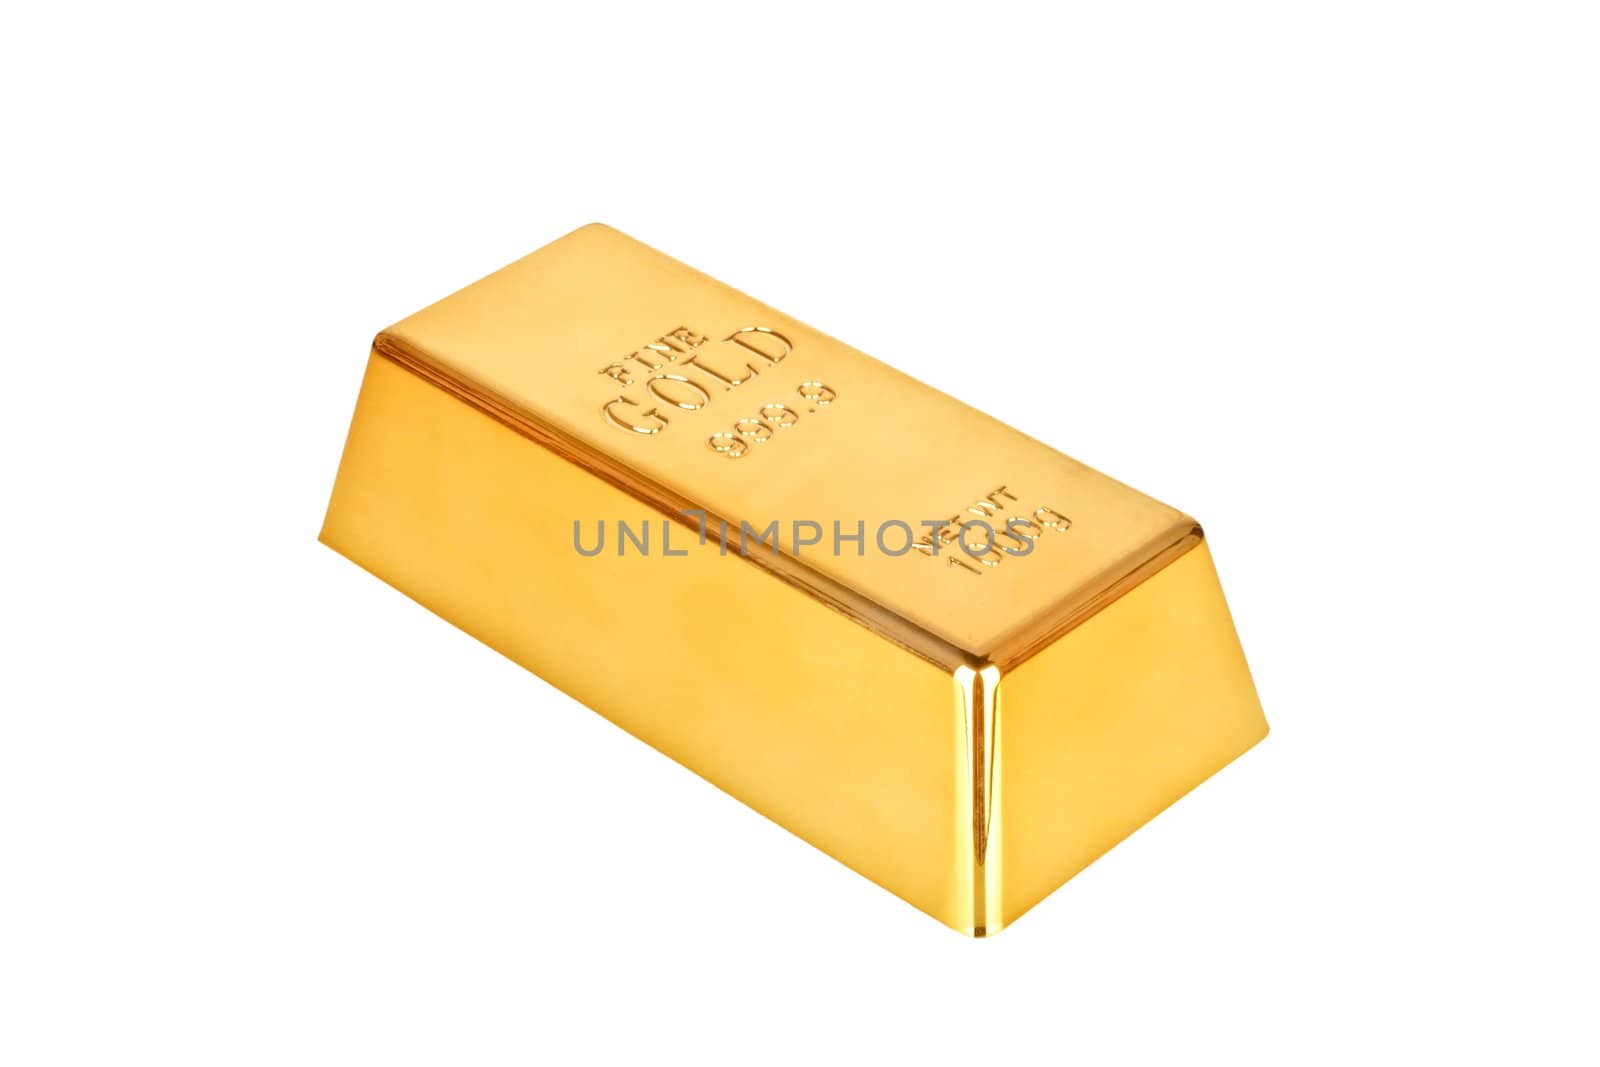 Gold bar on a white background by devy